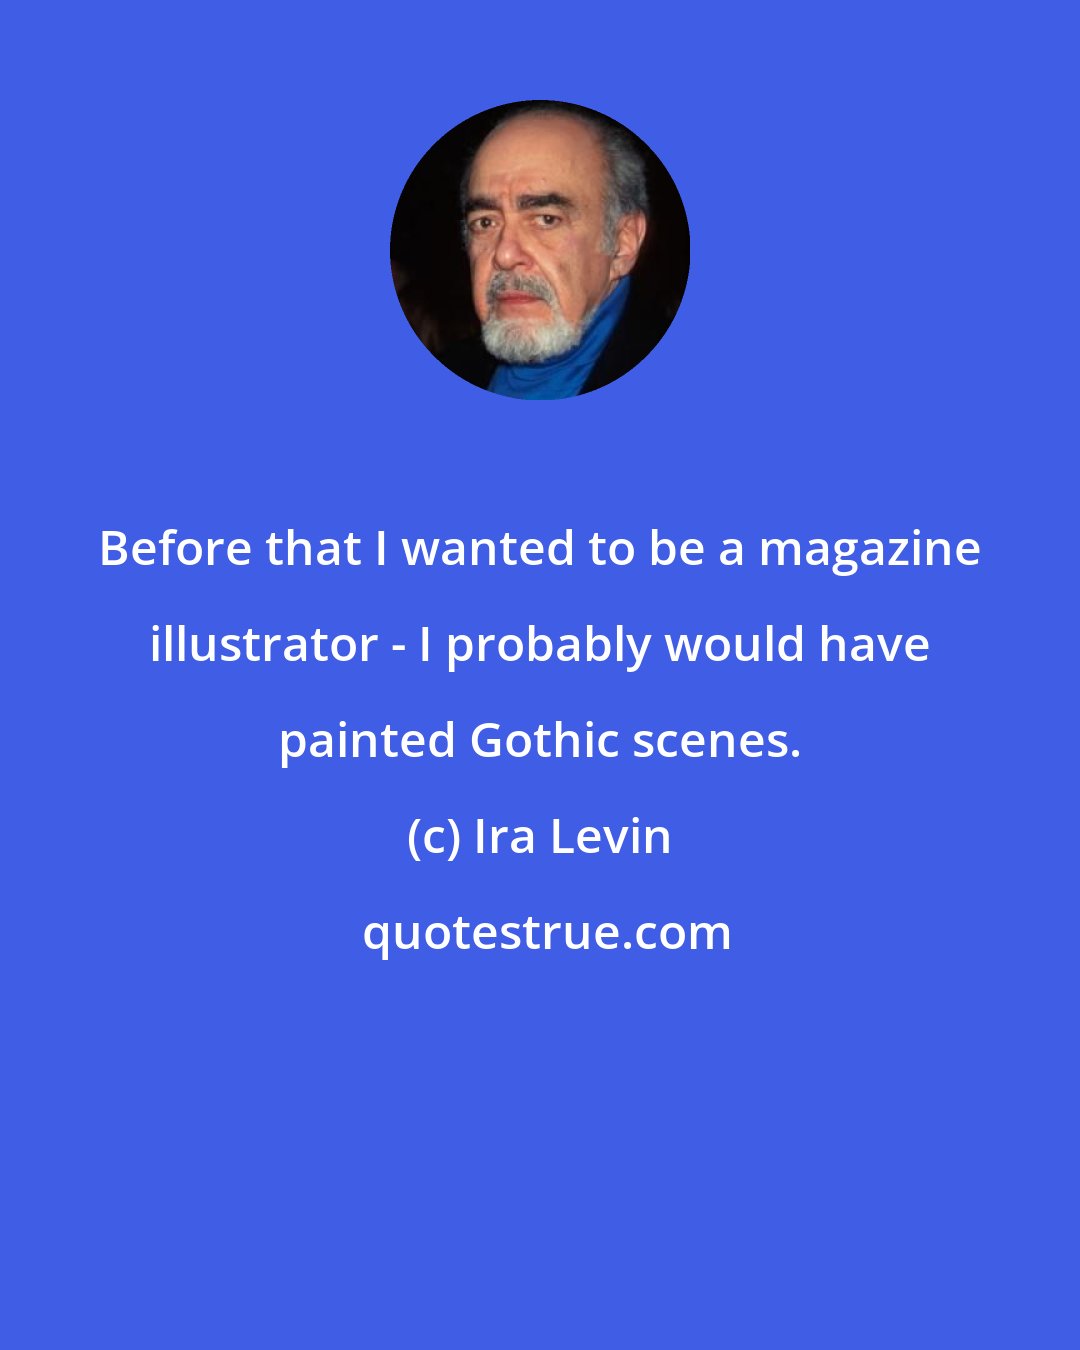 Ira Levin: Before that I wanted to be a magazine illustrator - I probably would have painted Gothic scenes.